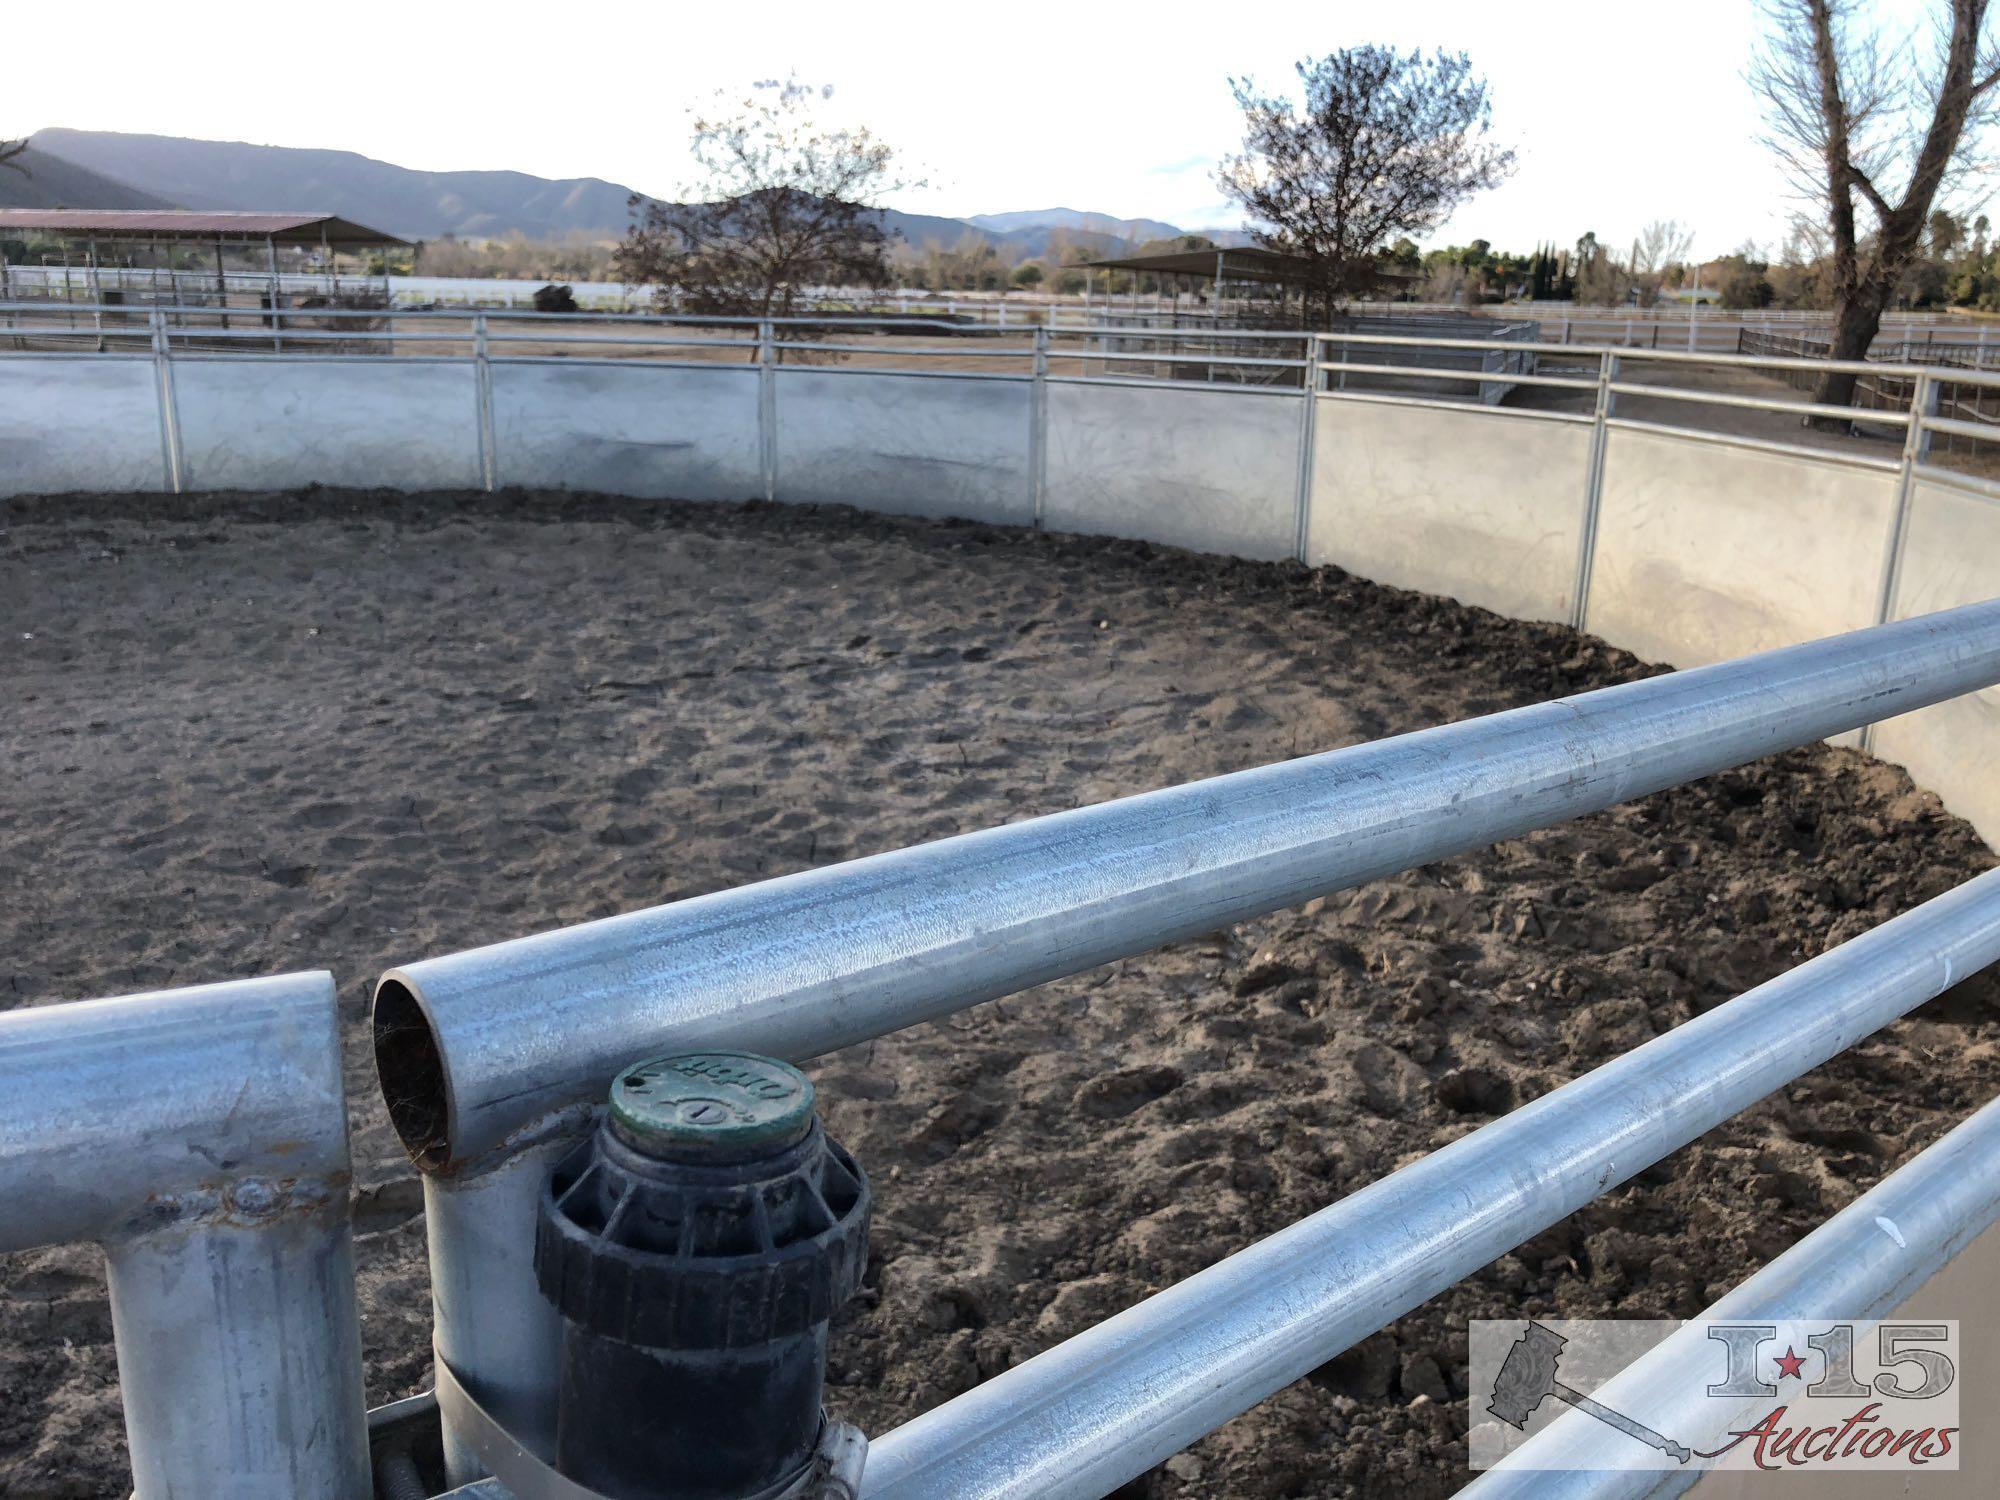 Solid panel Round pen 50 foot by 6 foot